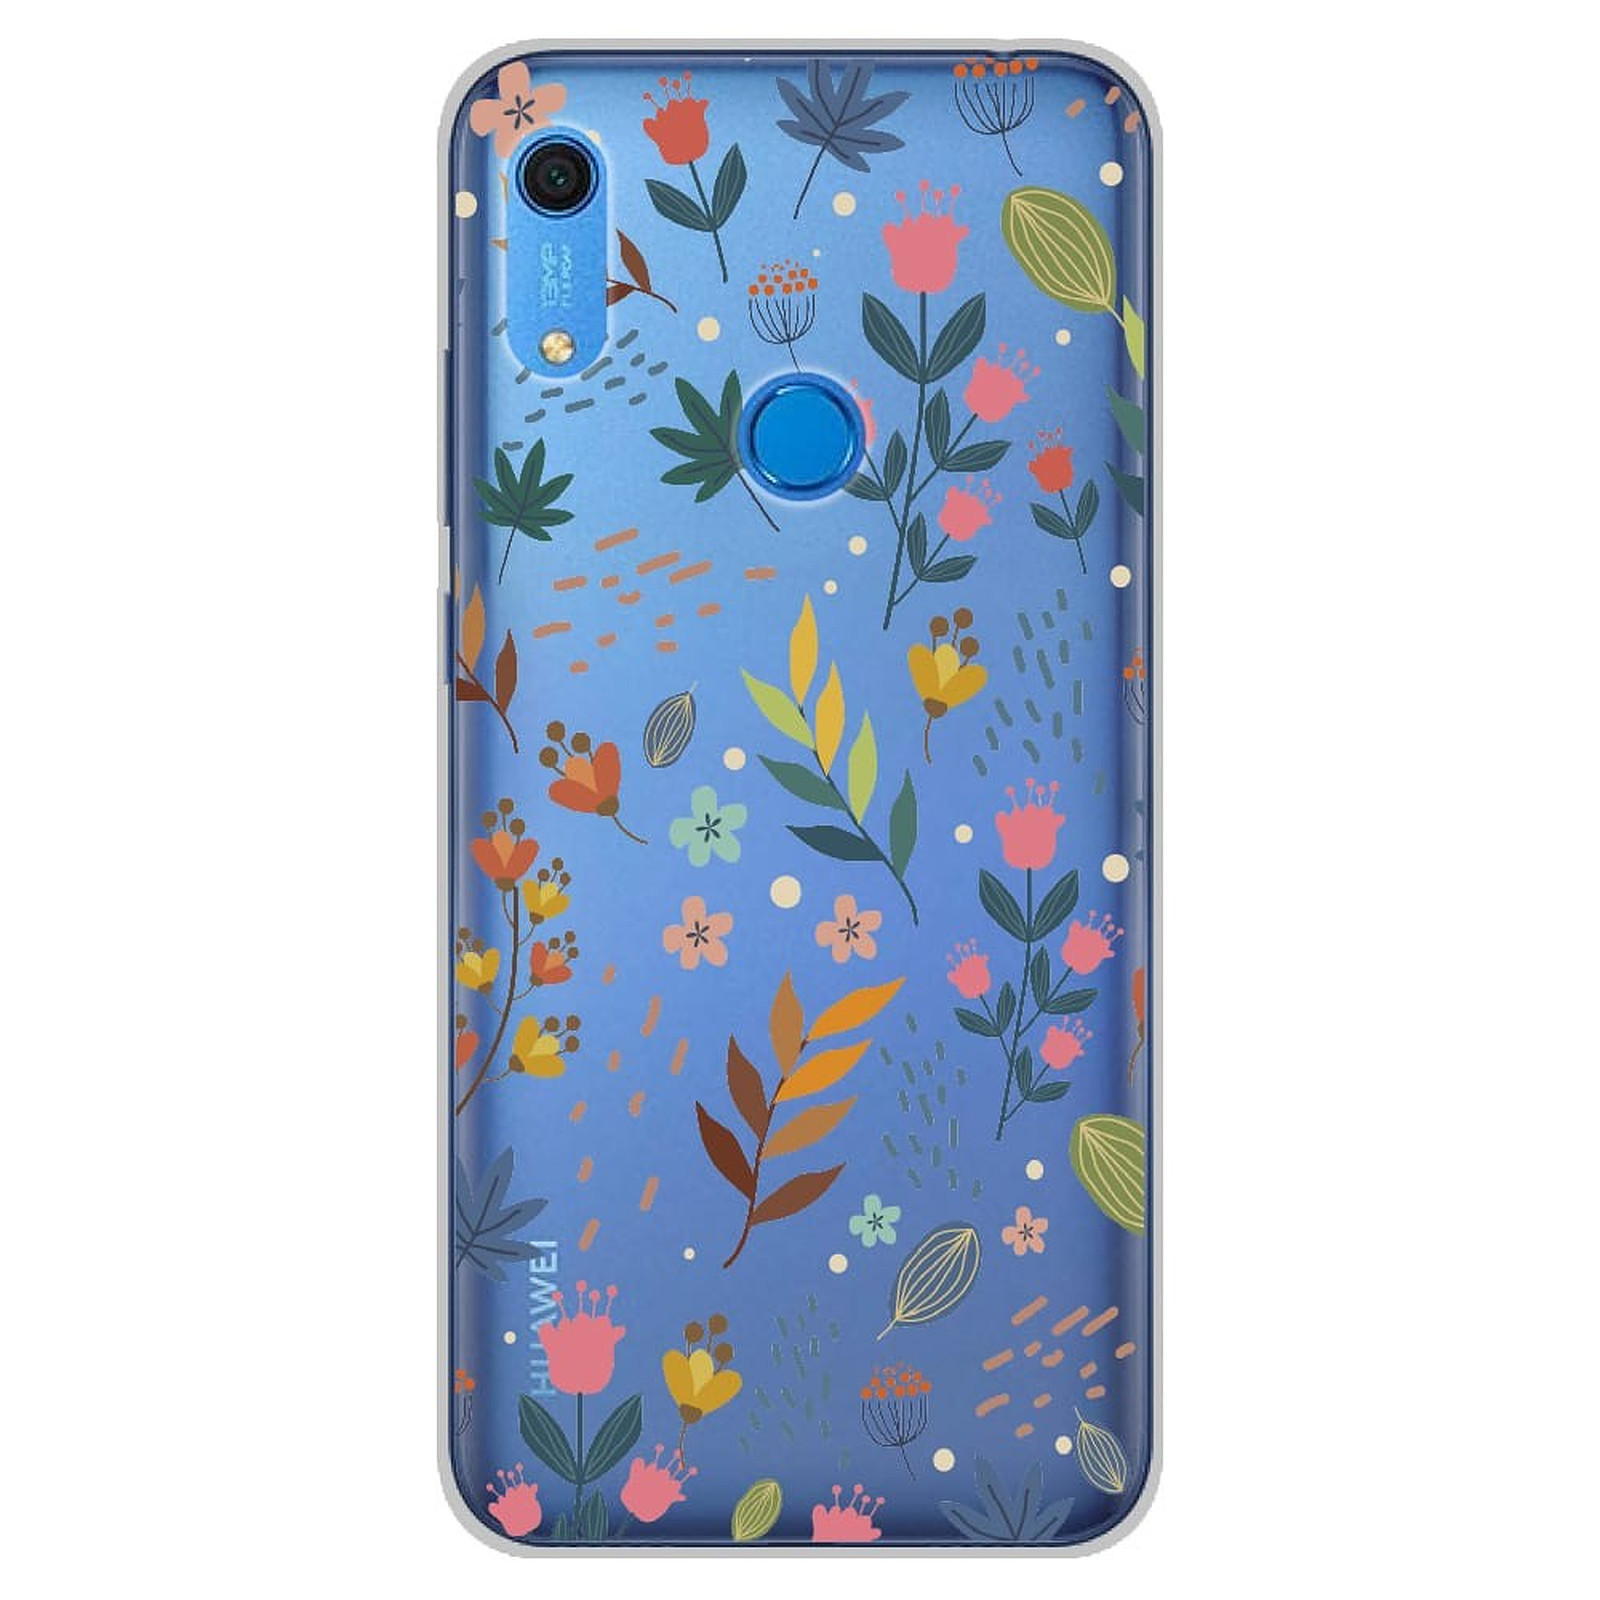 1001 Coques Coque silicone gel Huawei Y6S motif Fleurs colorees - Coque telephone 1001Coques